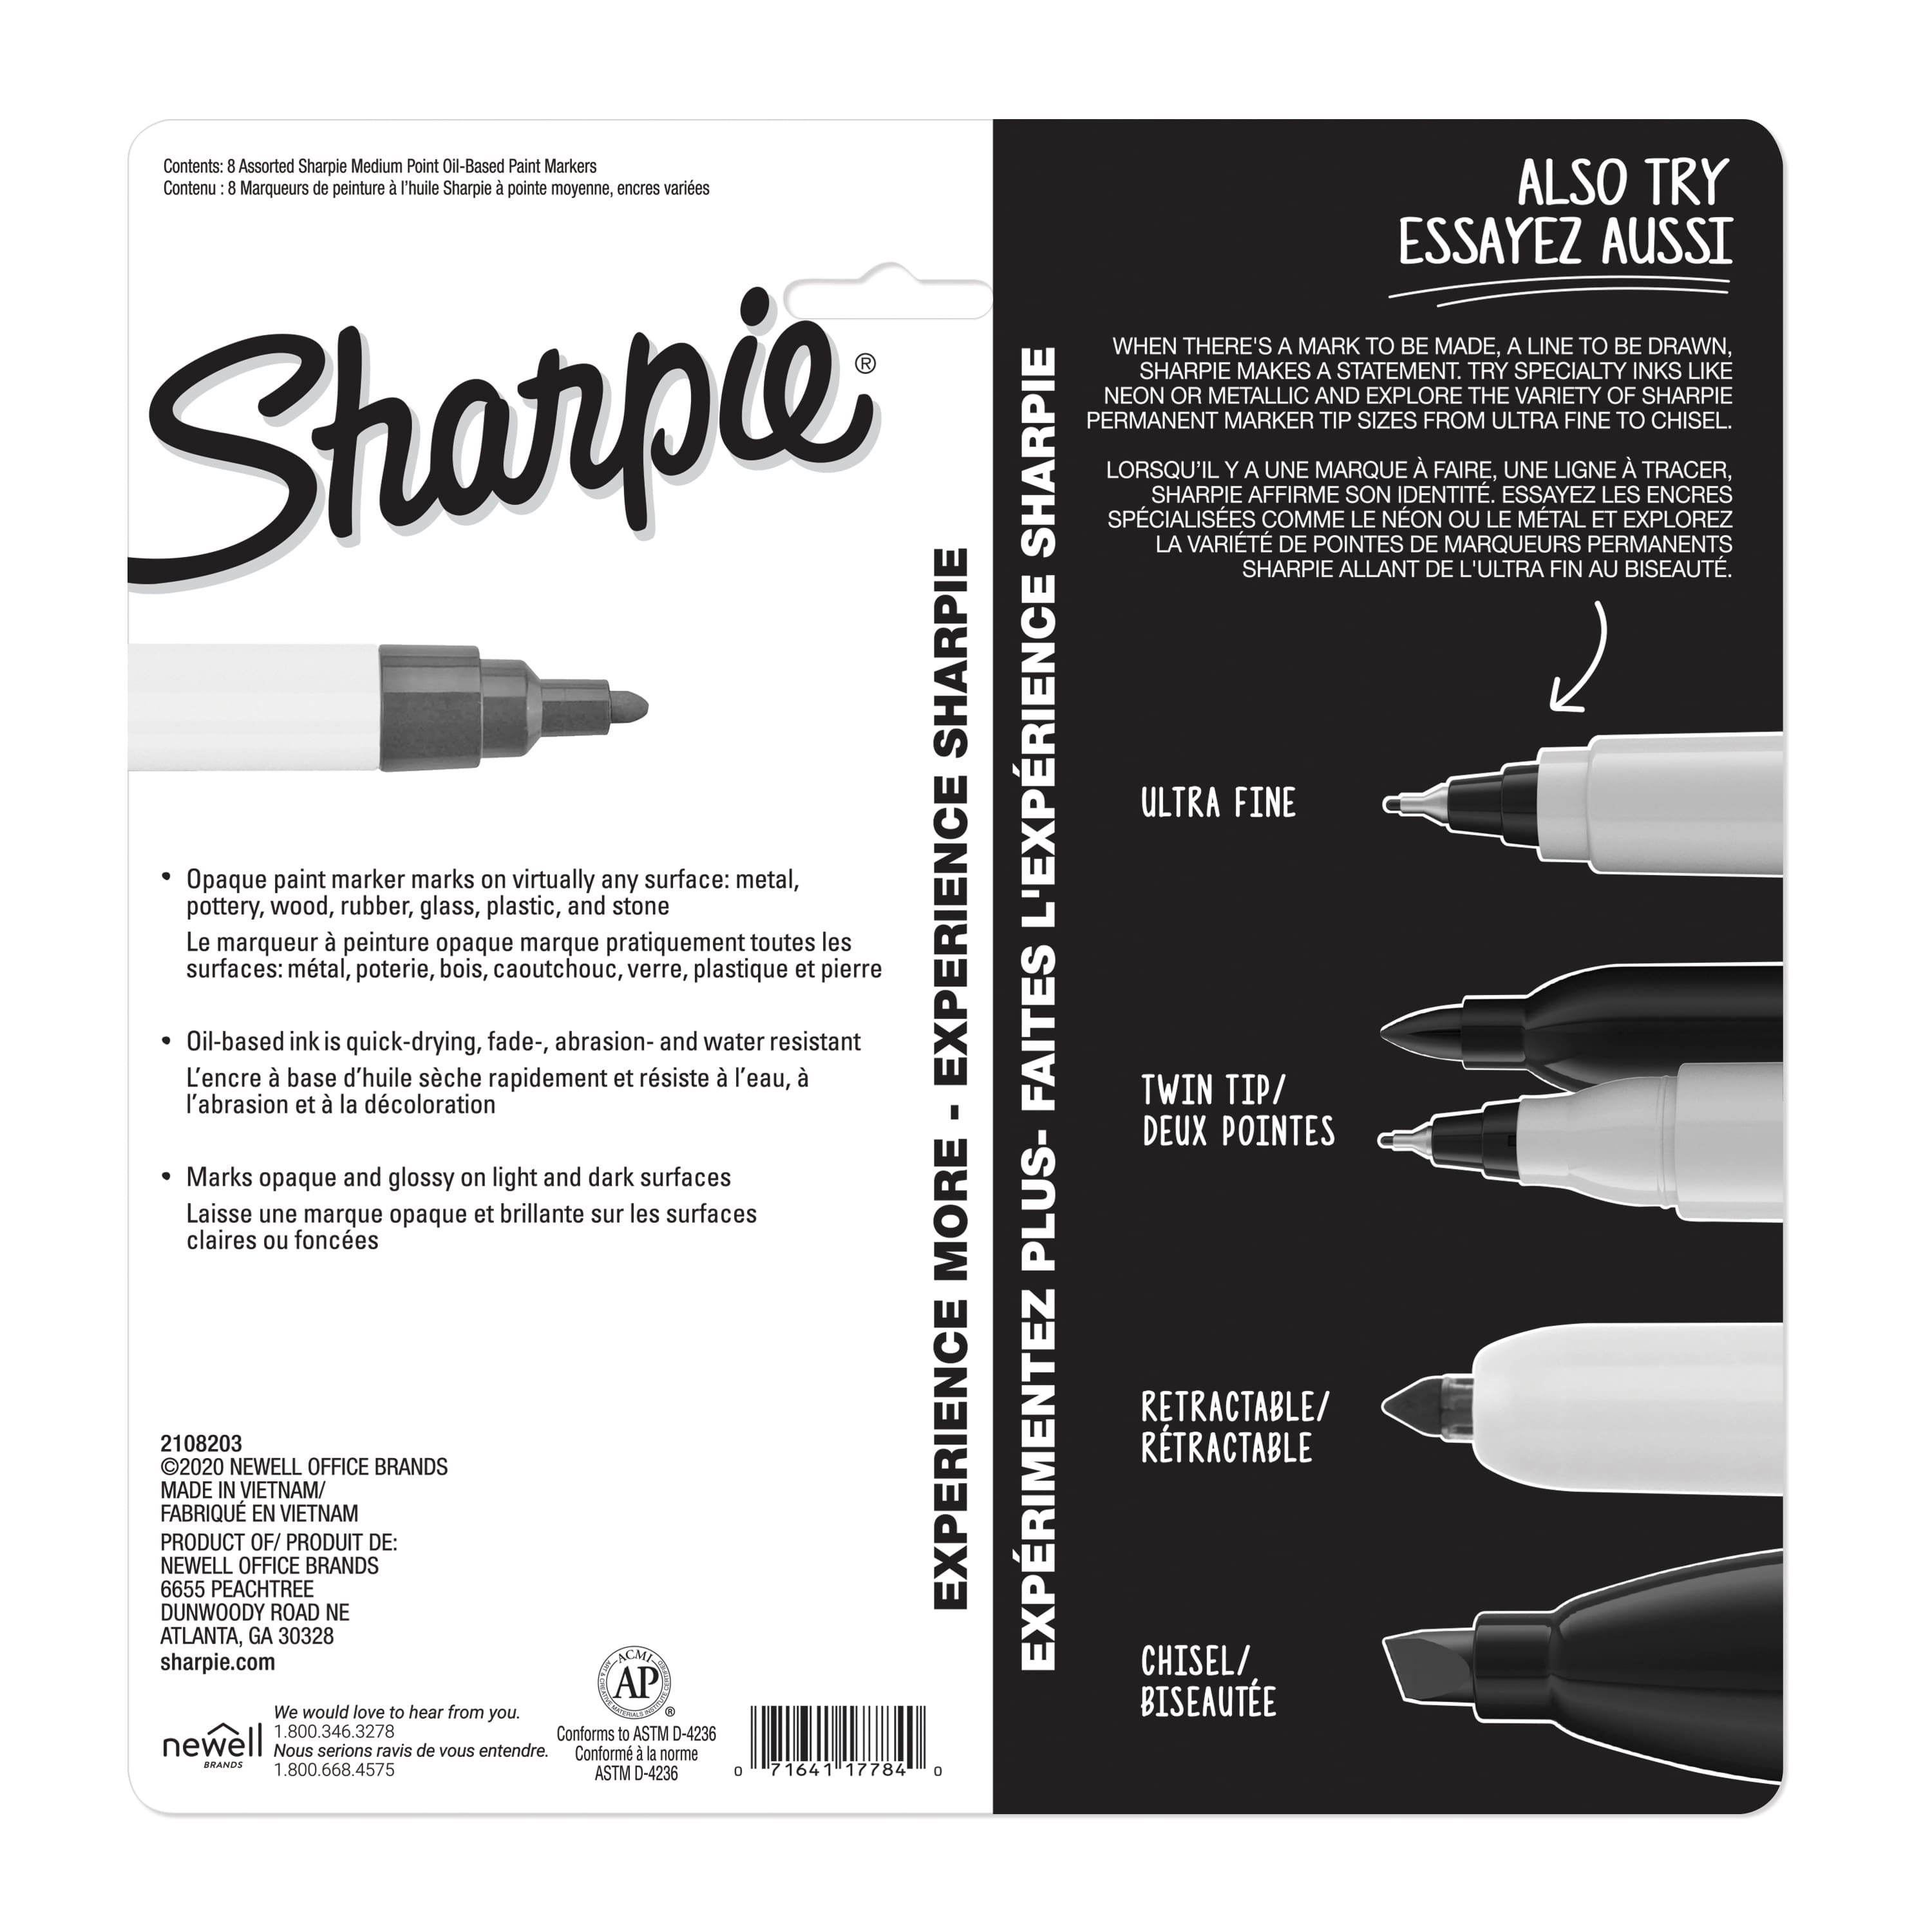  Sharpie Oil-Based Paint Marker, Medium Point, Blue Ink, Pack  of 3, Bundle with Plastic Reusable Pouch : Office Products